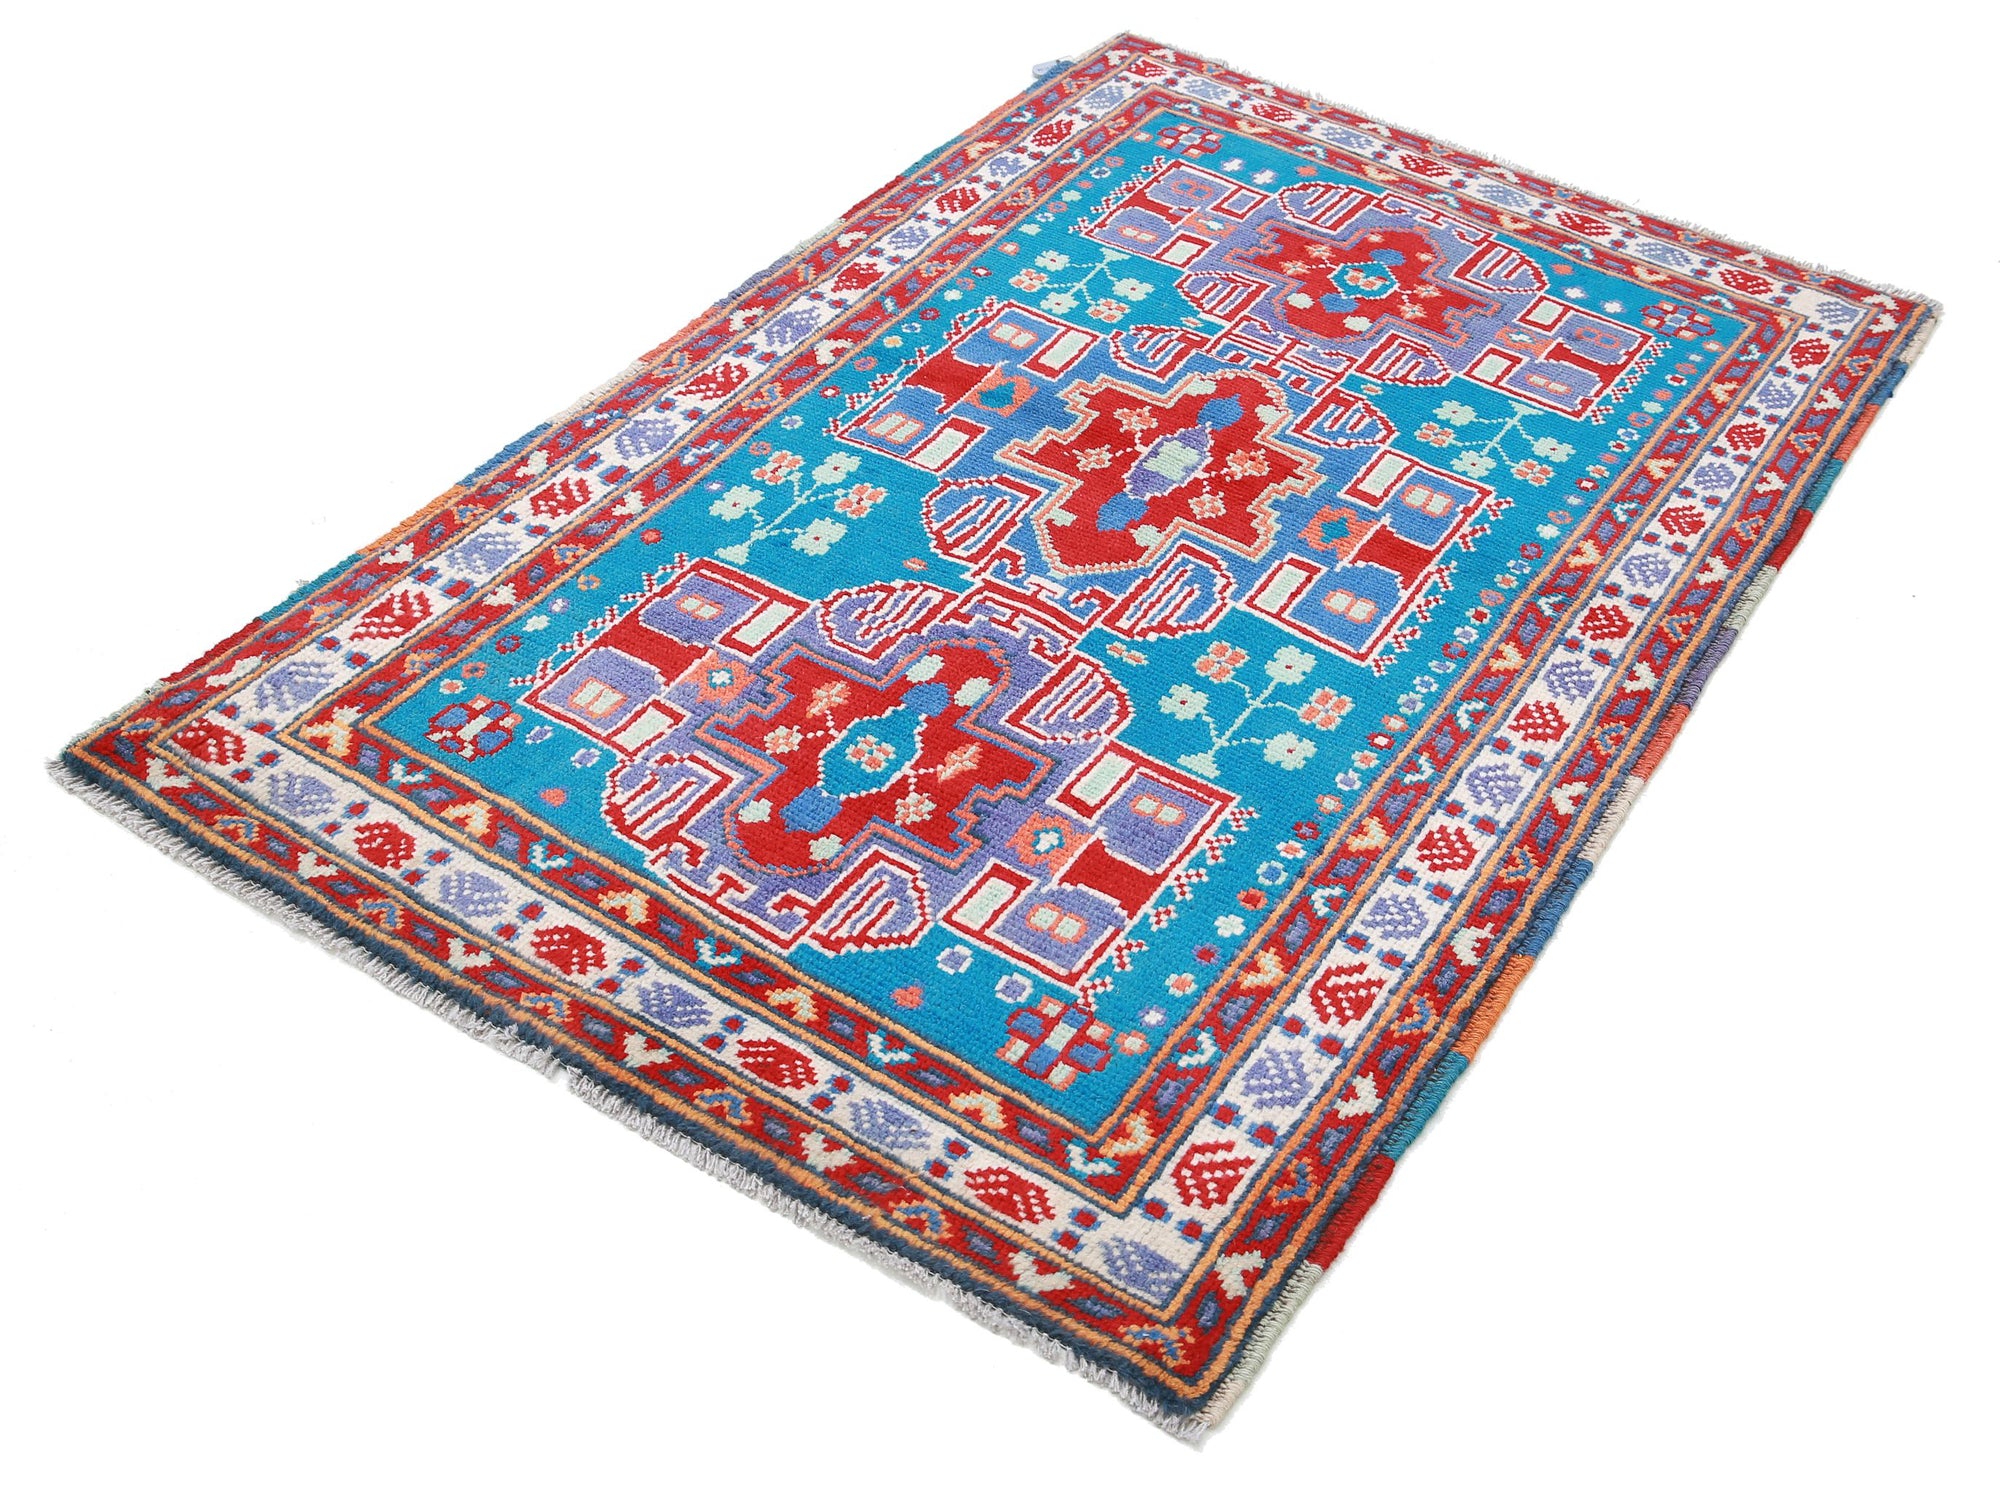 Revival-hand-knotted-qarghani-wool-rug-5014065-2.jpg